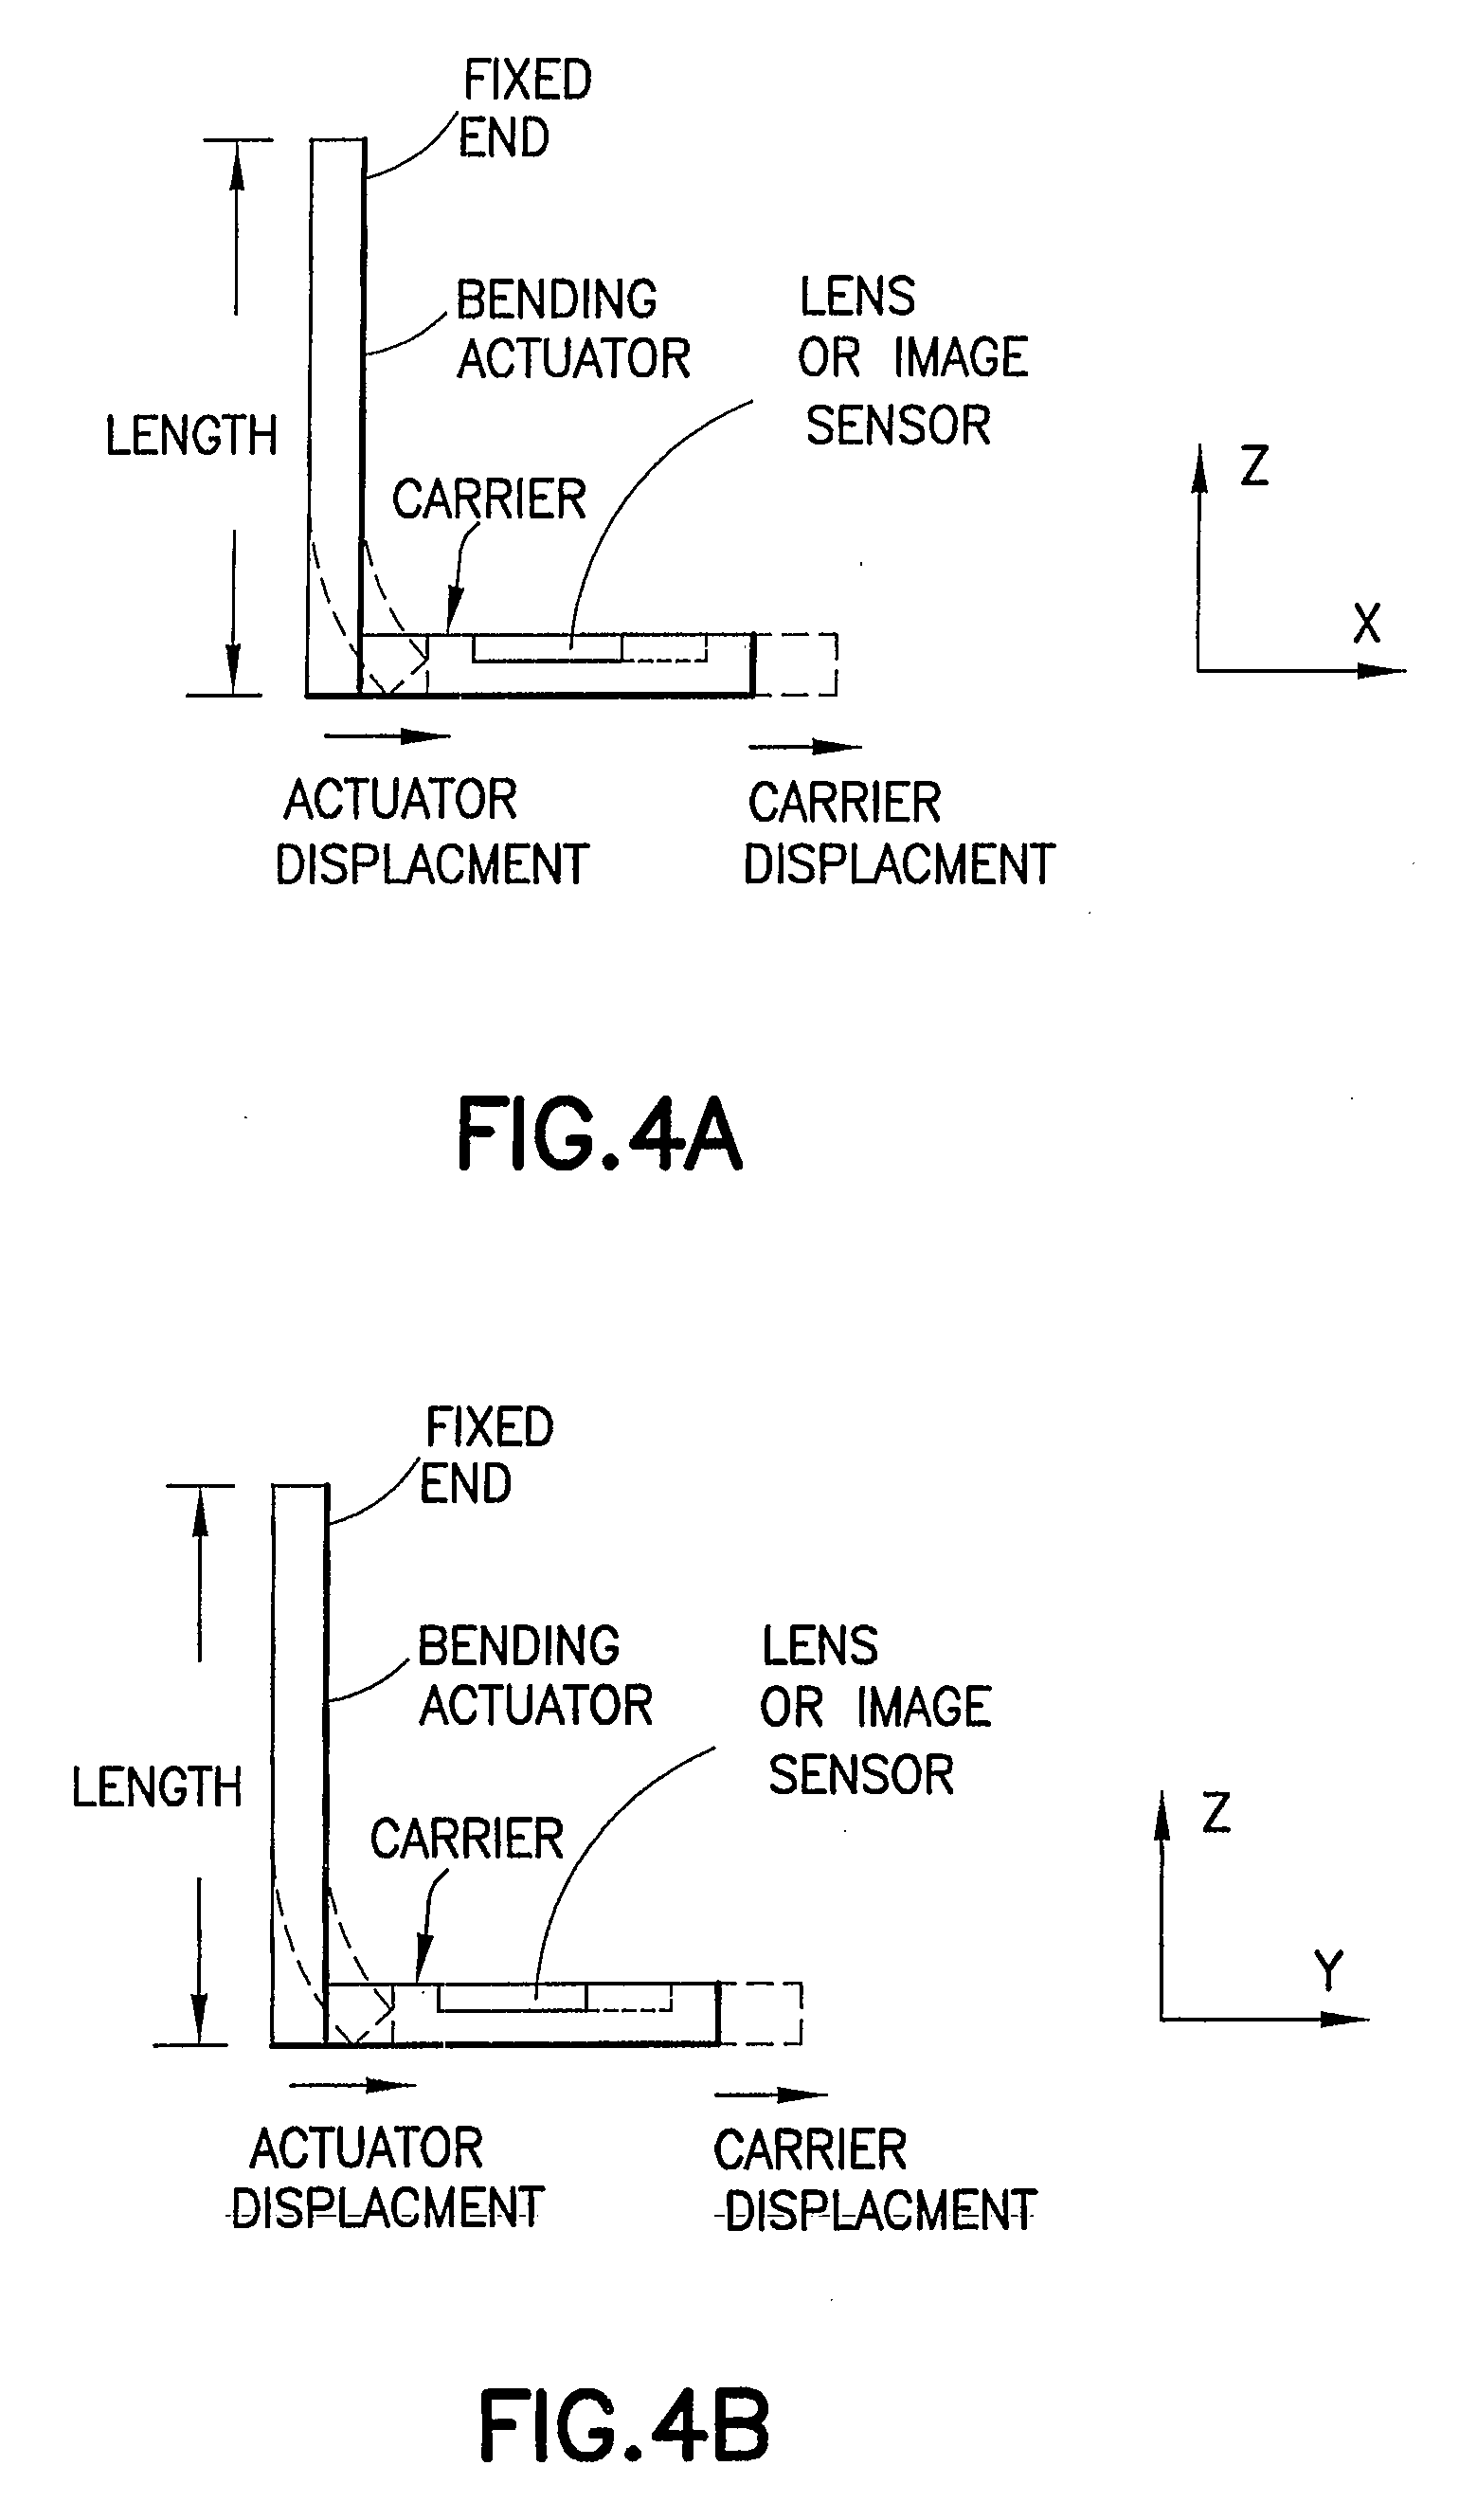 Method and System for Image Stabilization